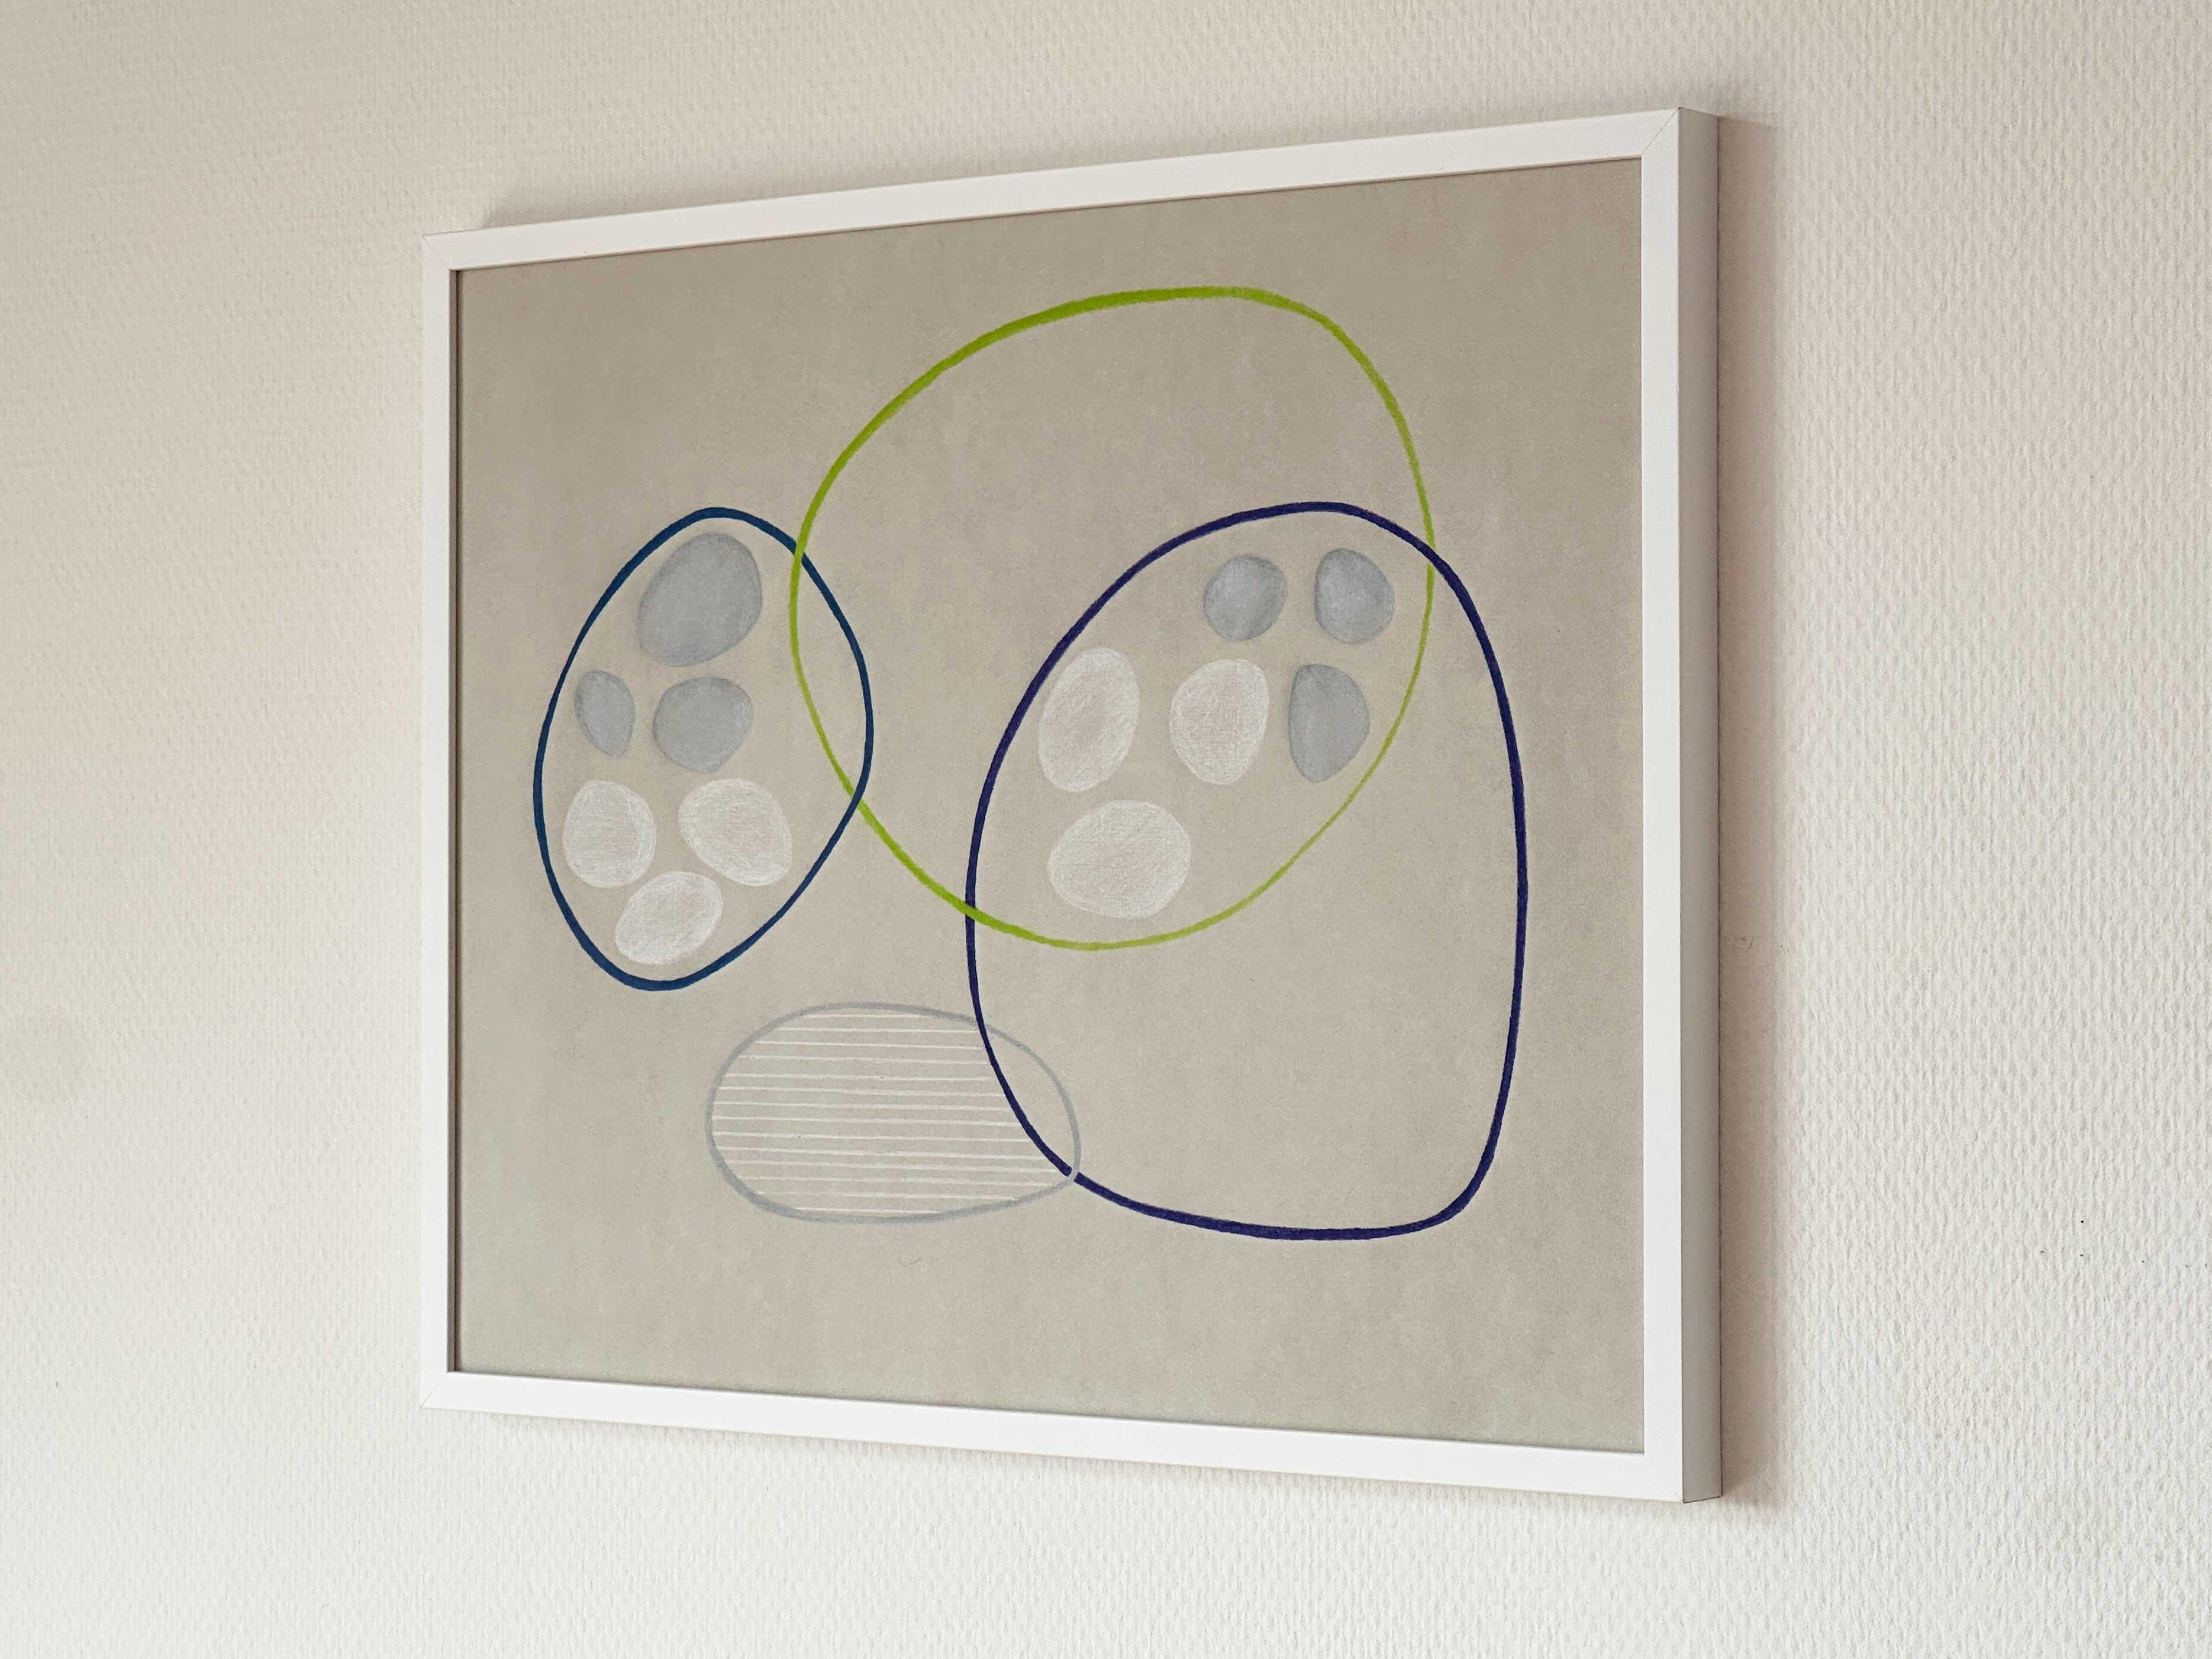 Venn Diagram Drawing on Paper Color Pencil blue Wabi-Sabi assymettric shapes - Beige Abstract Drawing by Amanda Andersen